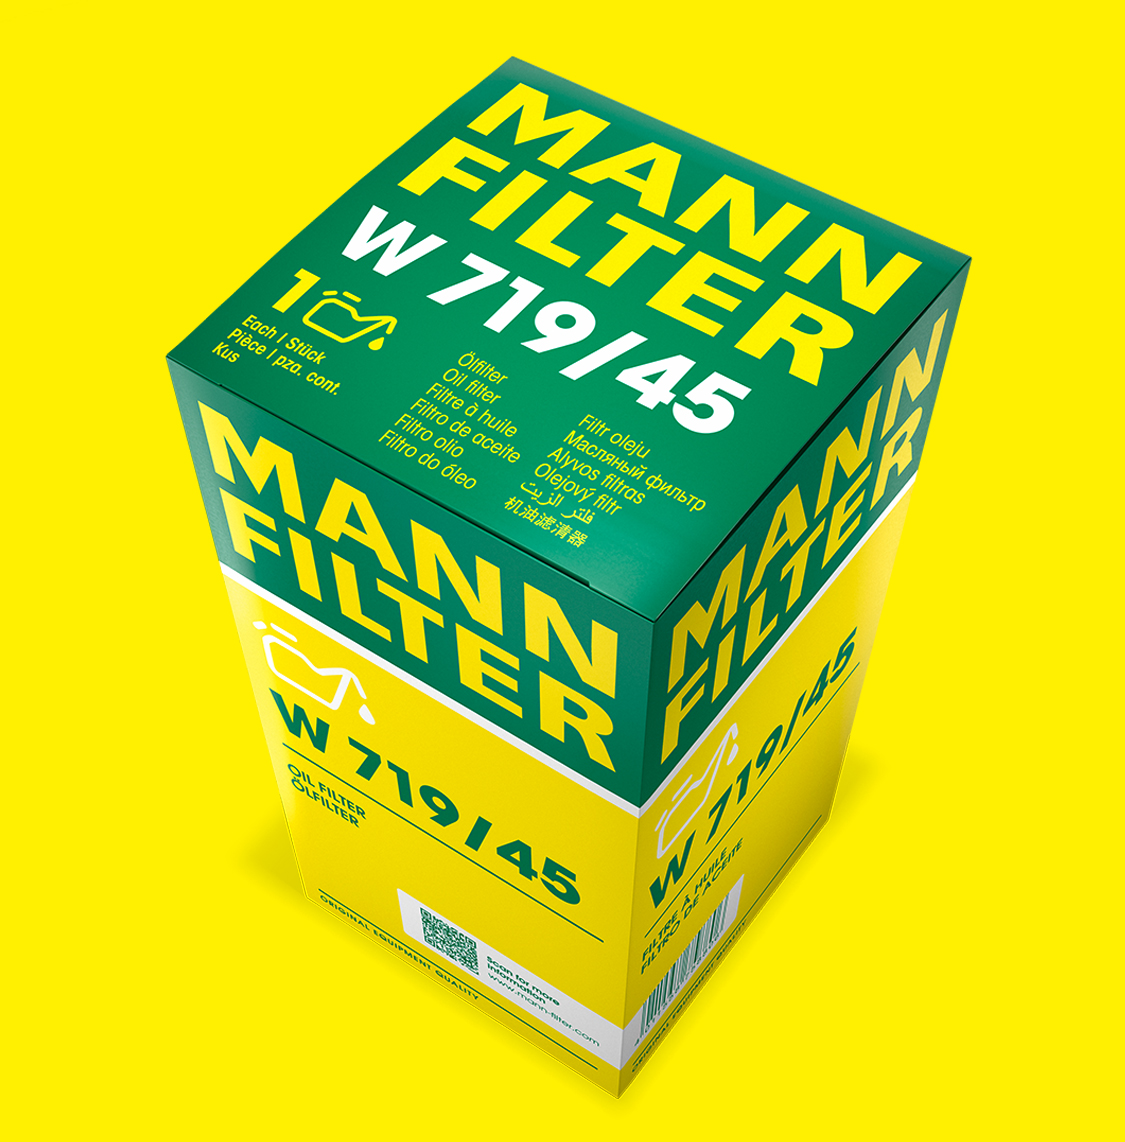 View of an example of the new MANN-FILTER packaging: view of the new lid design